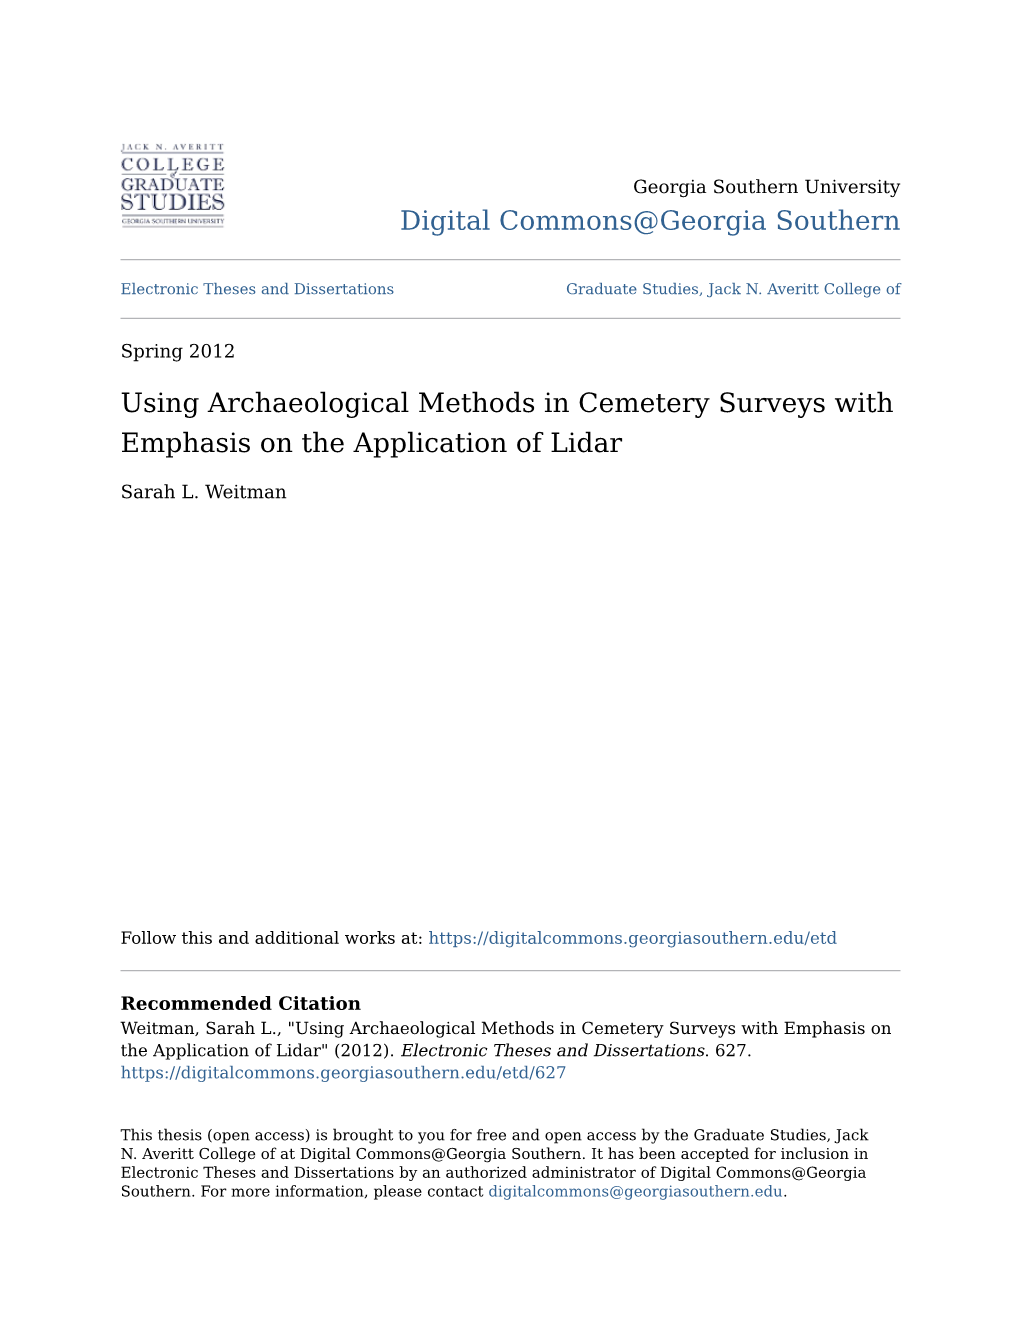 Using Archaeological Methods in Cemetery Surveys with Emphasis on the Application of Lidar